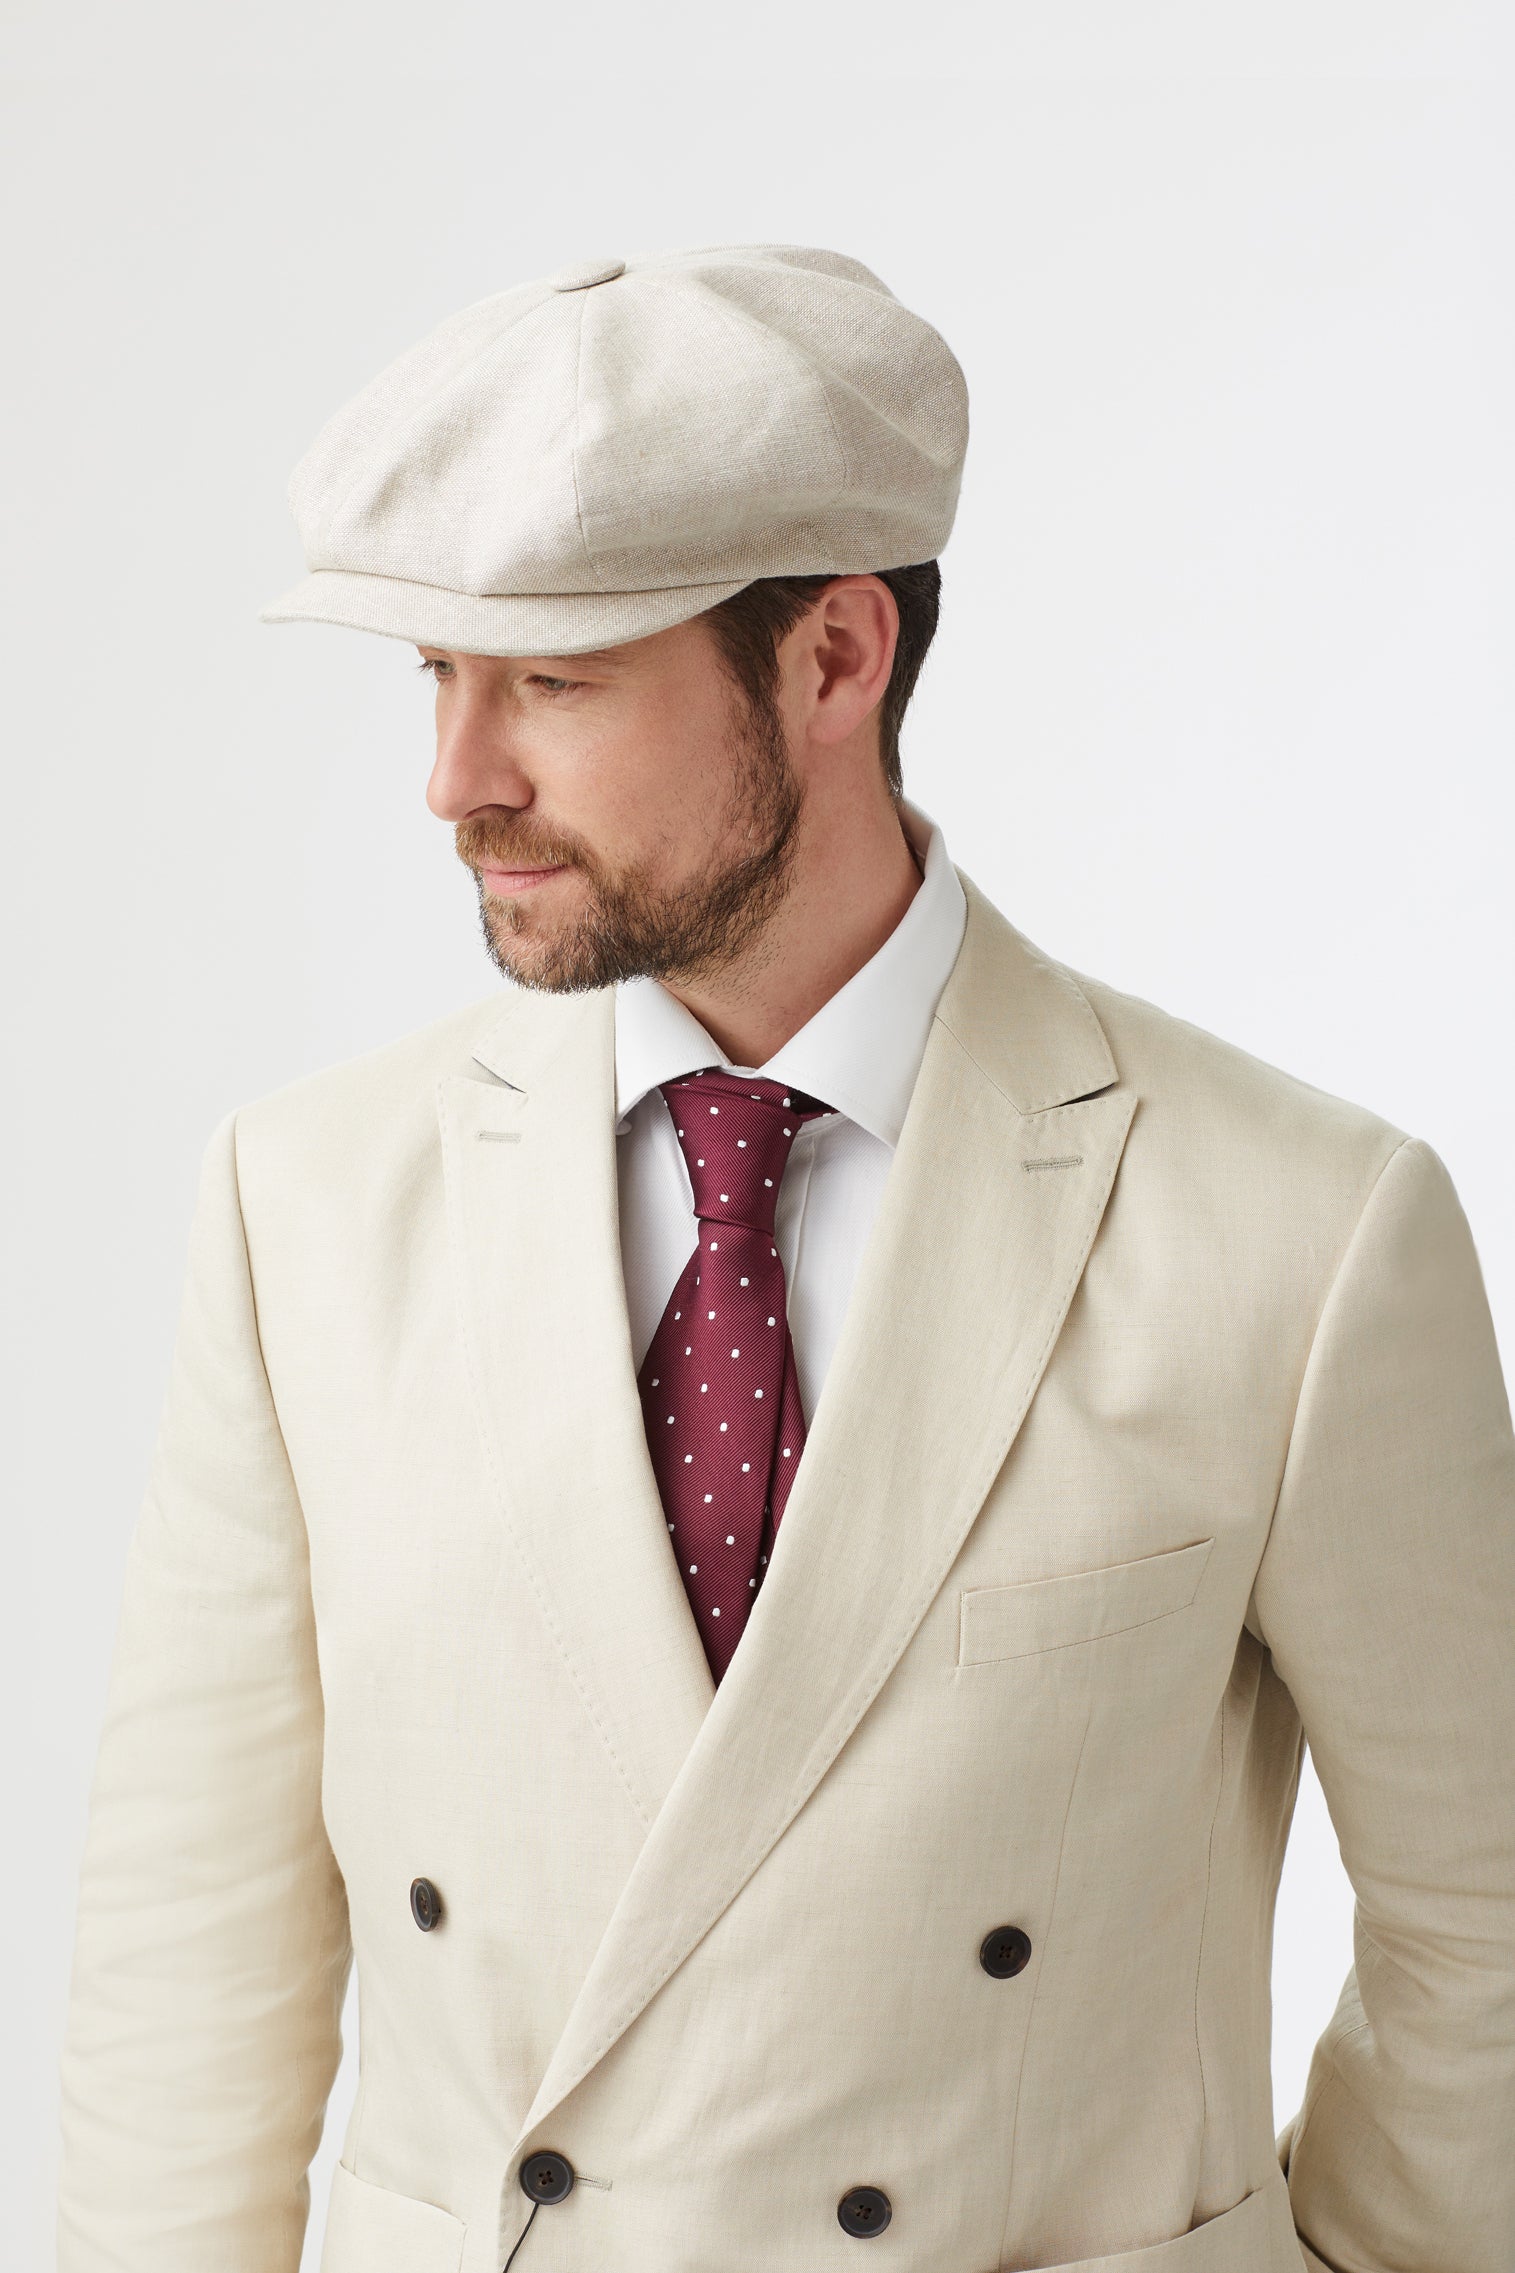 Linen Muirfield Bakerboy Cap - Father's Day Gift Guide - Lock & Co. Hatters London UK